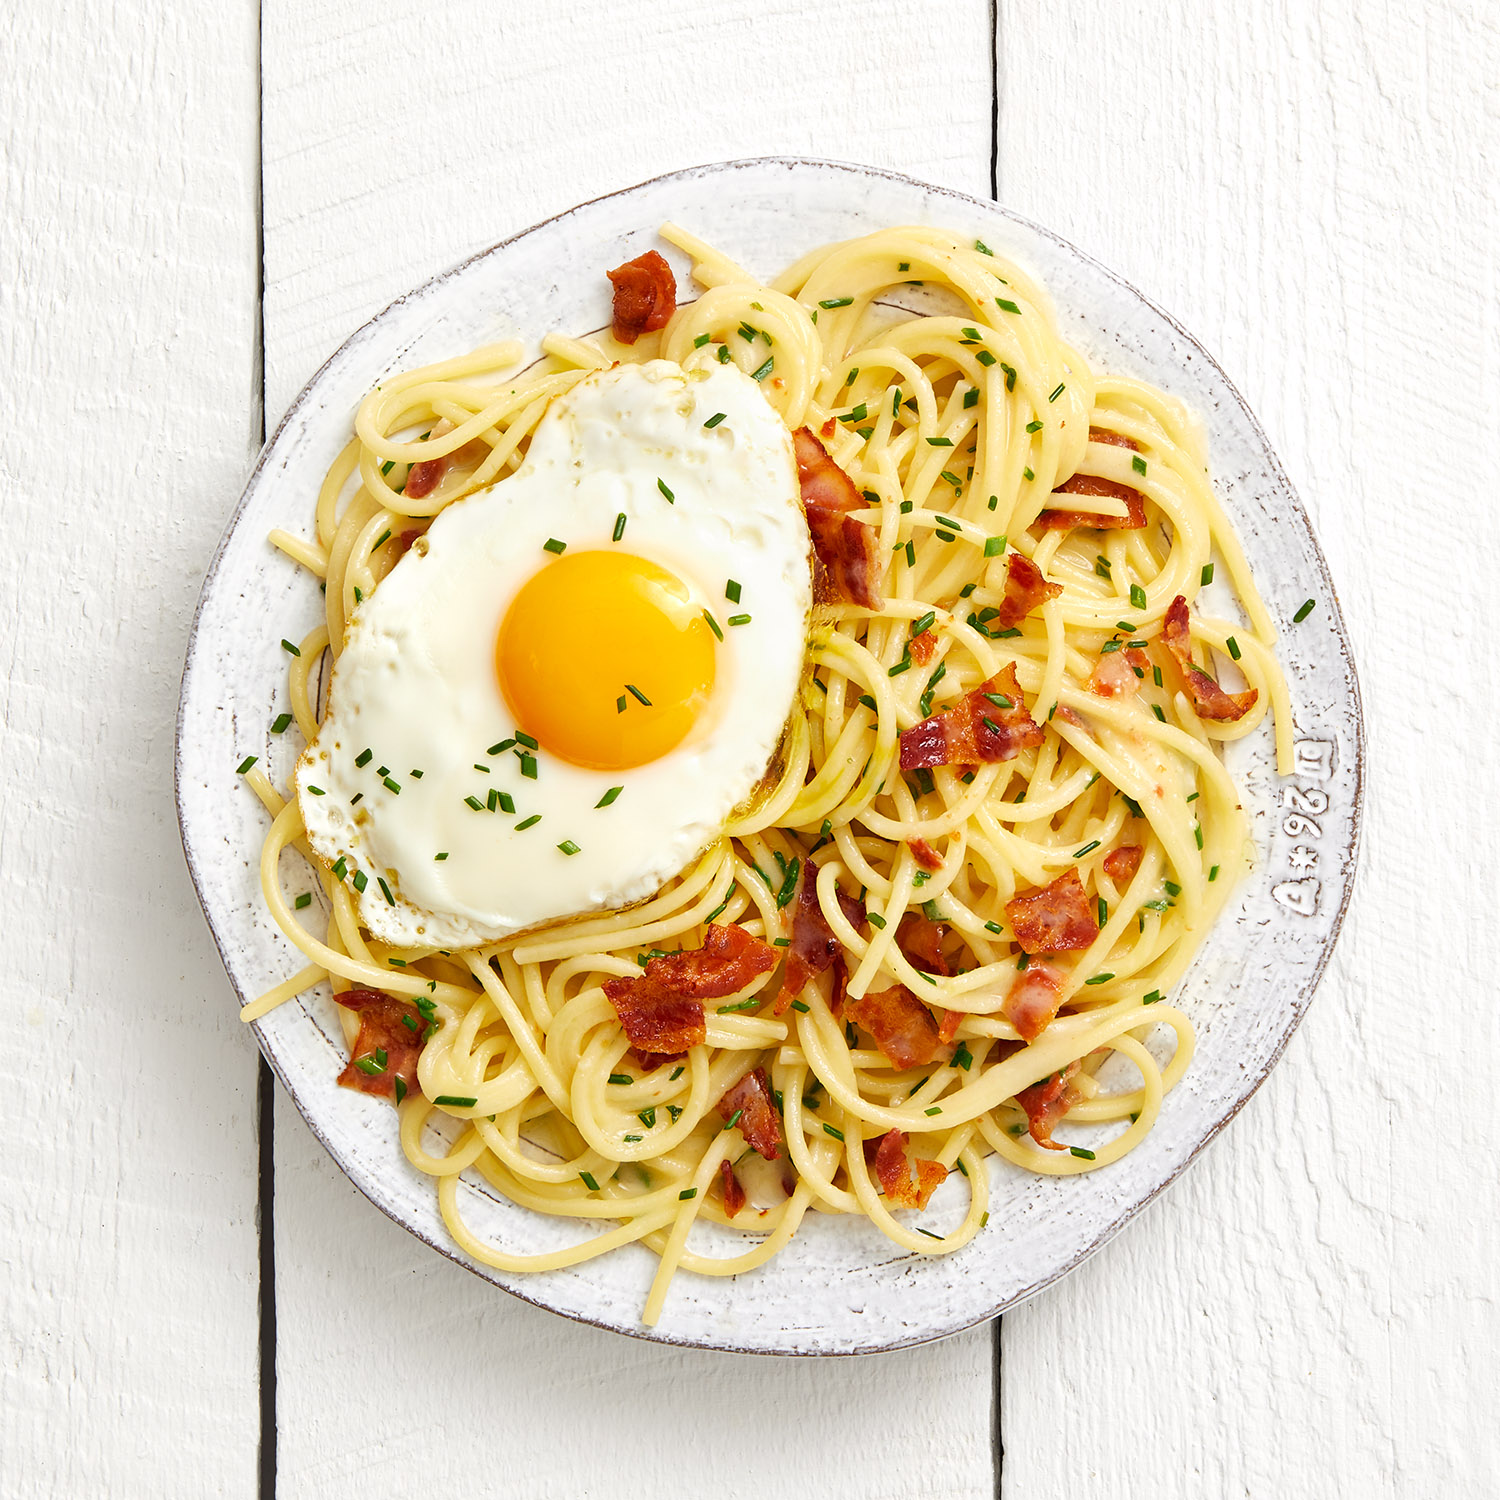 Bacon and Egg Pasta